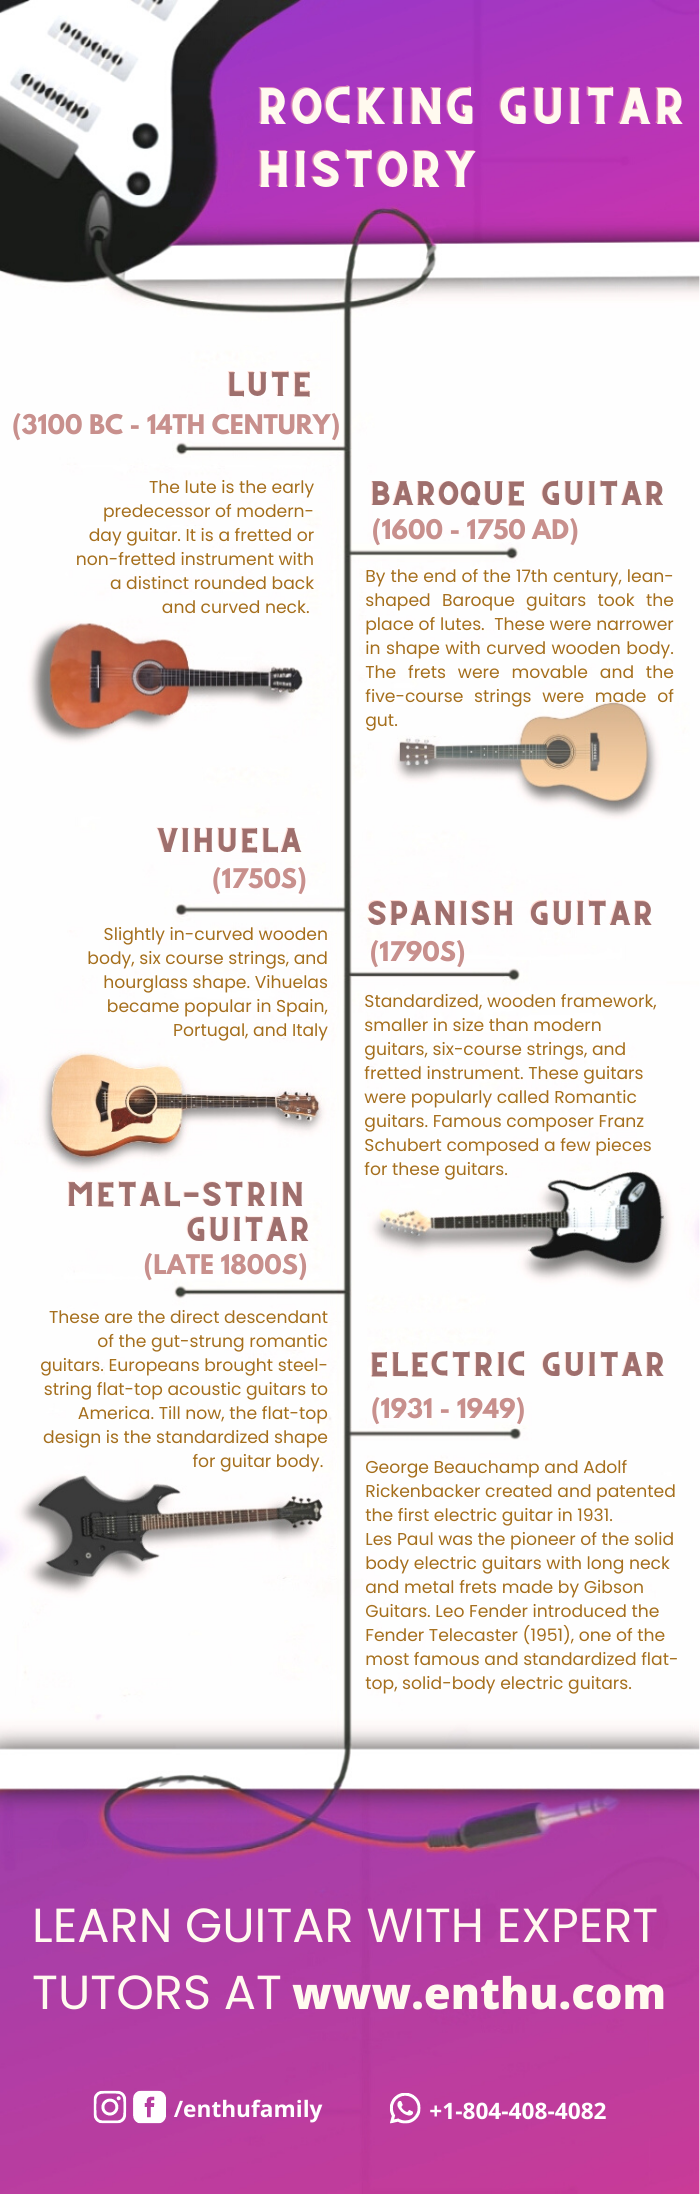 write an essay on the history of guitar